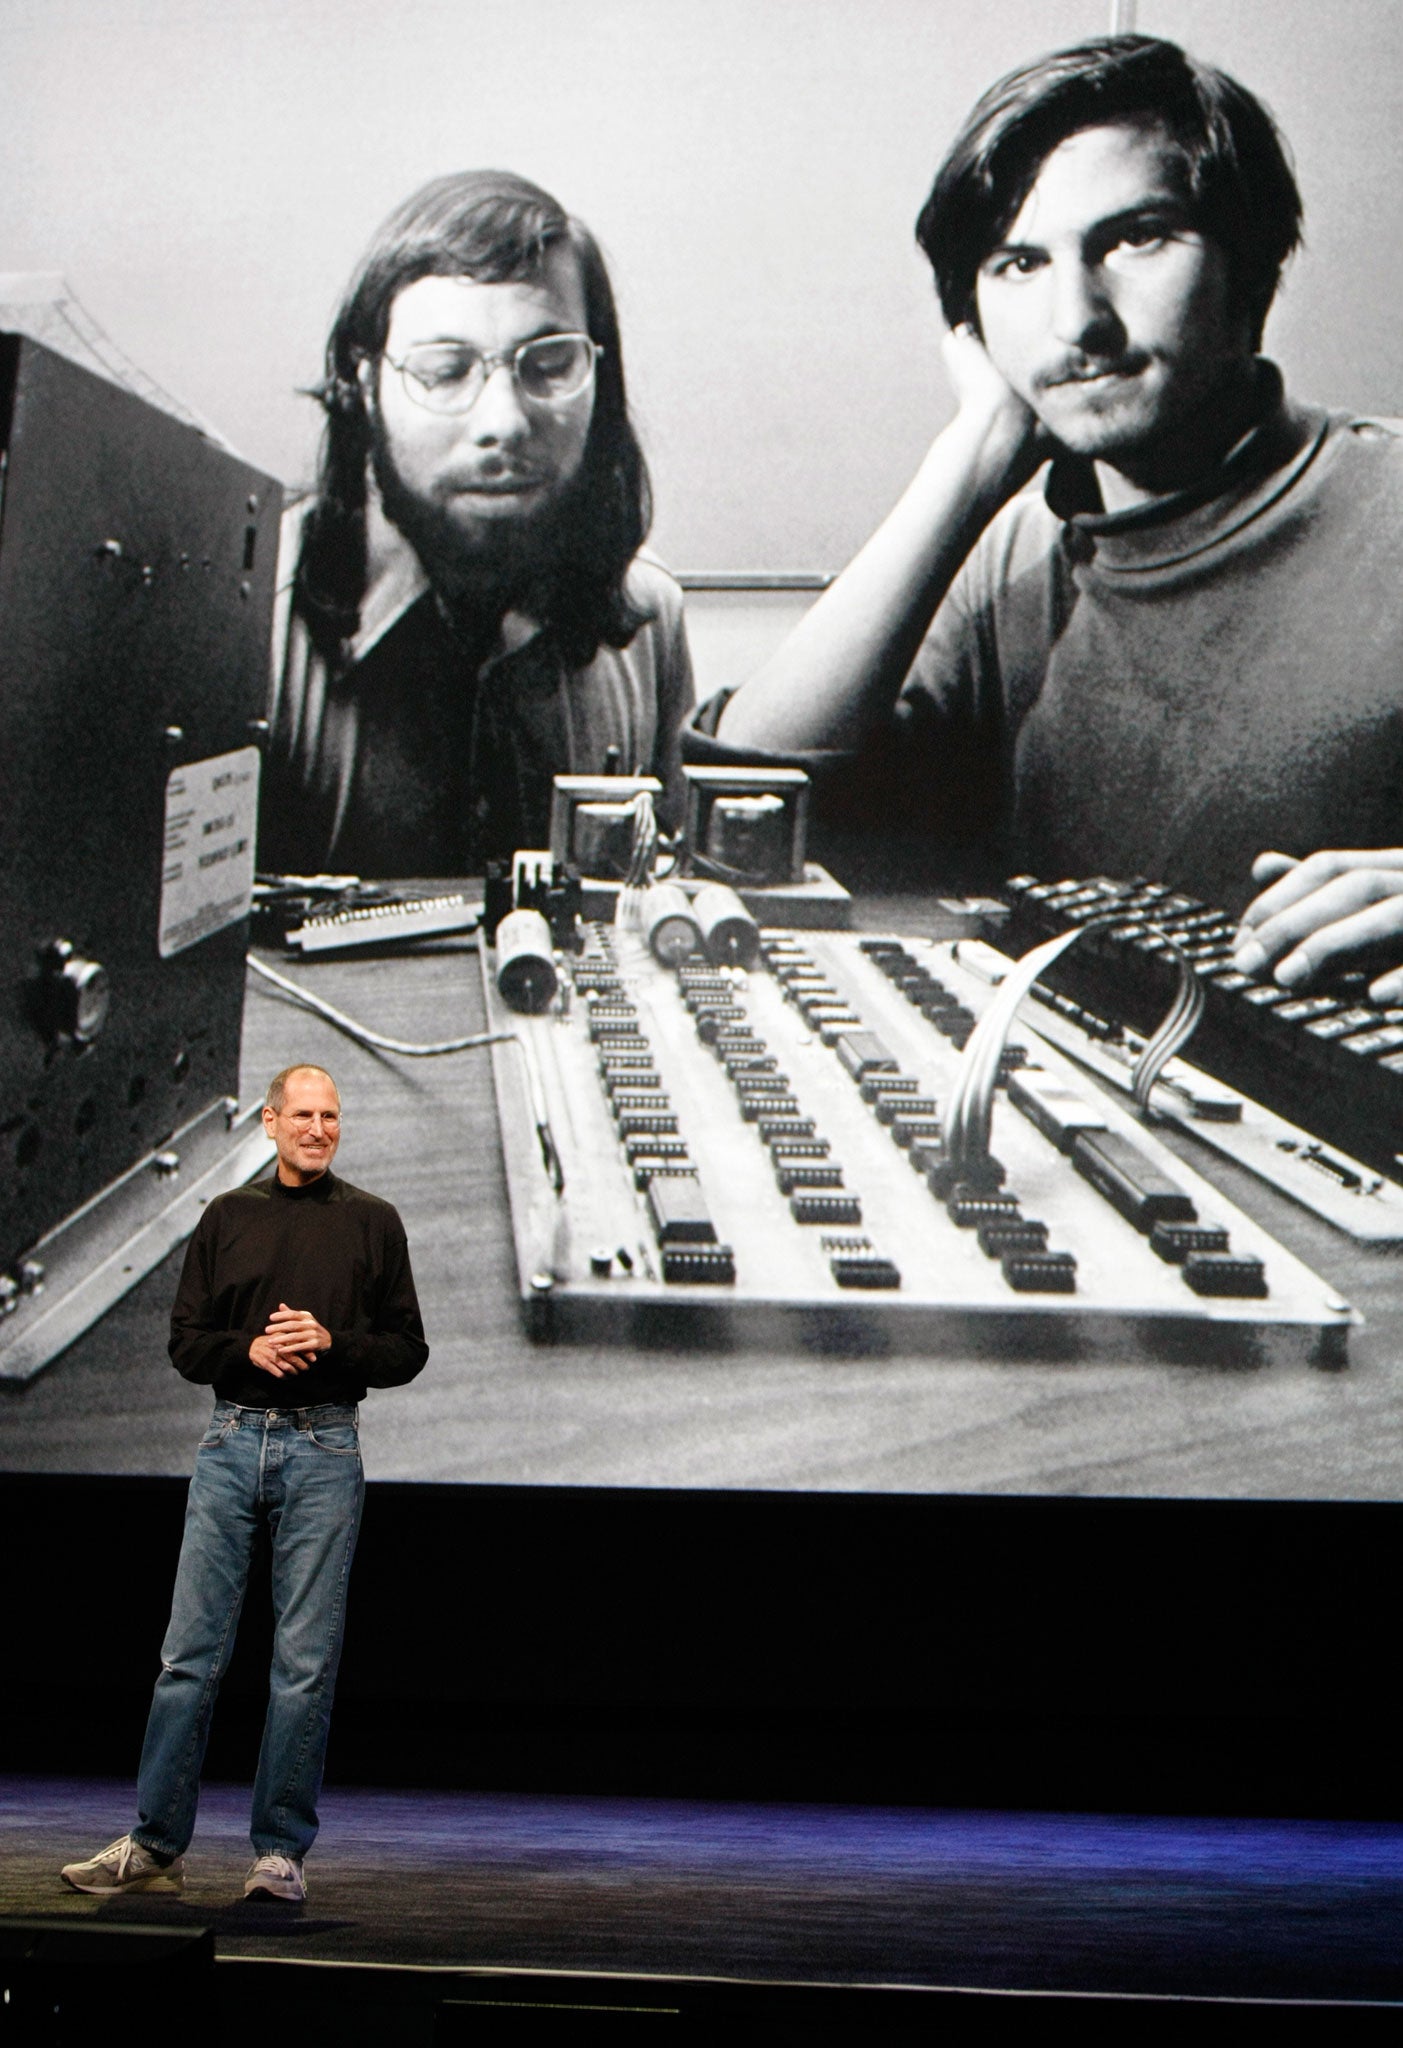 Jobs retiring in 2011 in front of a photograph of himself and Steve Wozniak